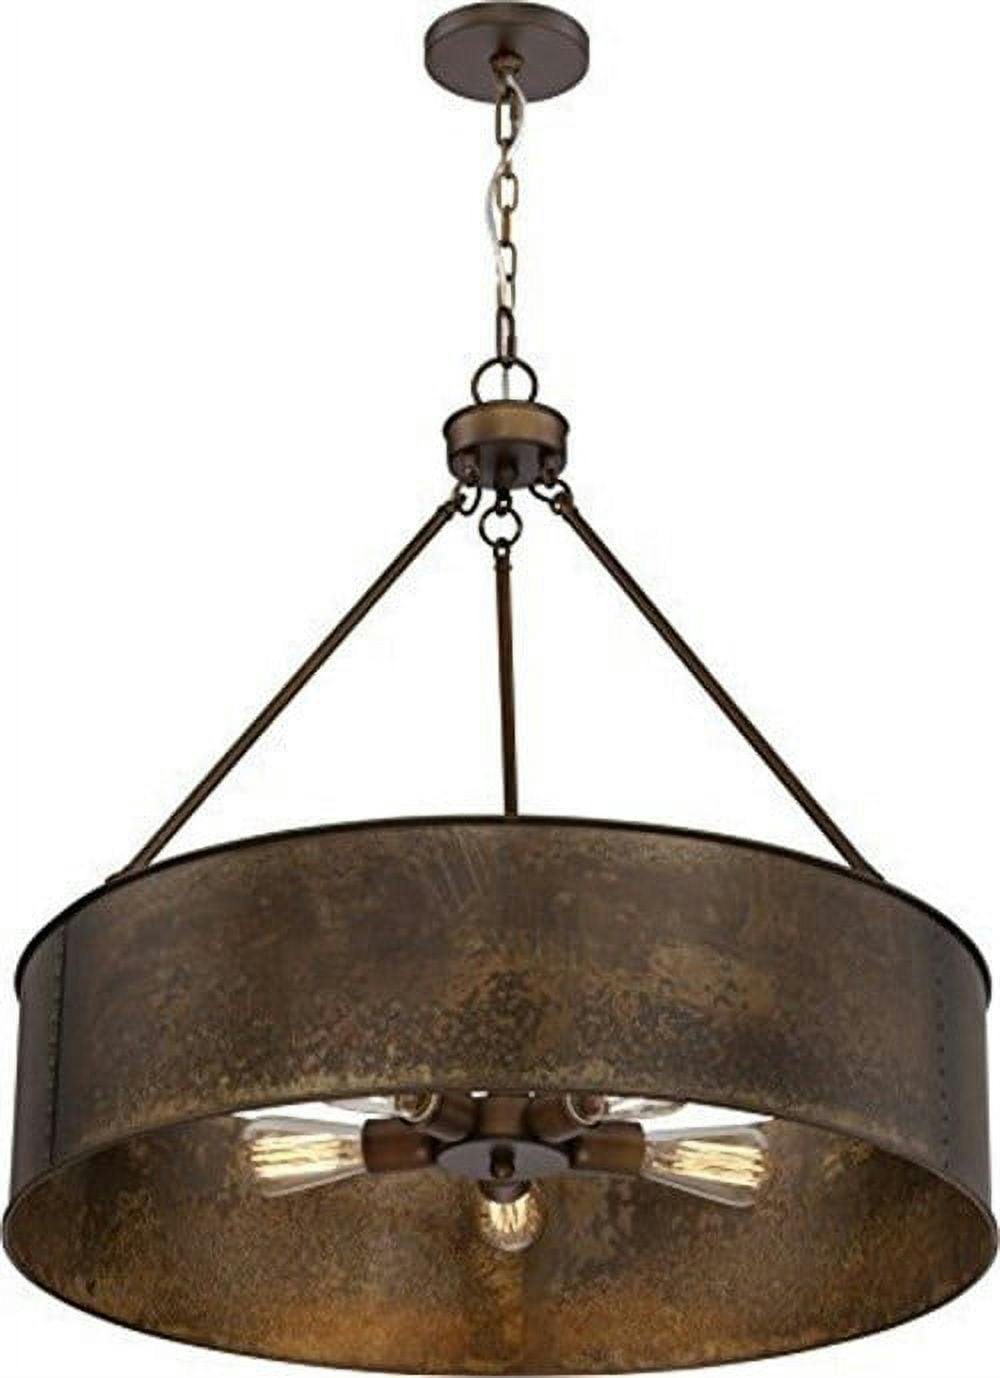 Vintage Weathered Brass Drum Pendant Light with LED Capability